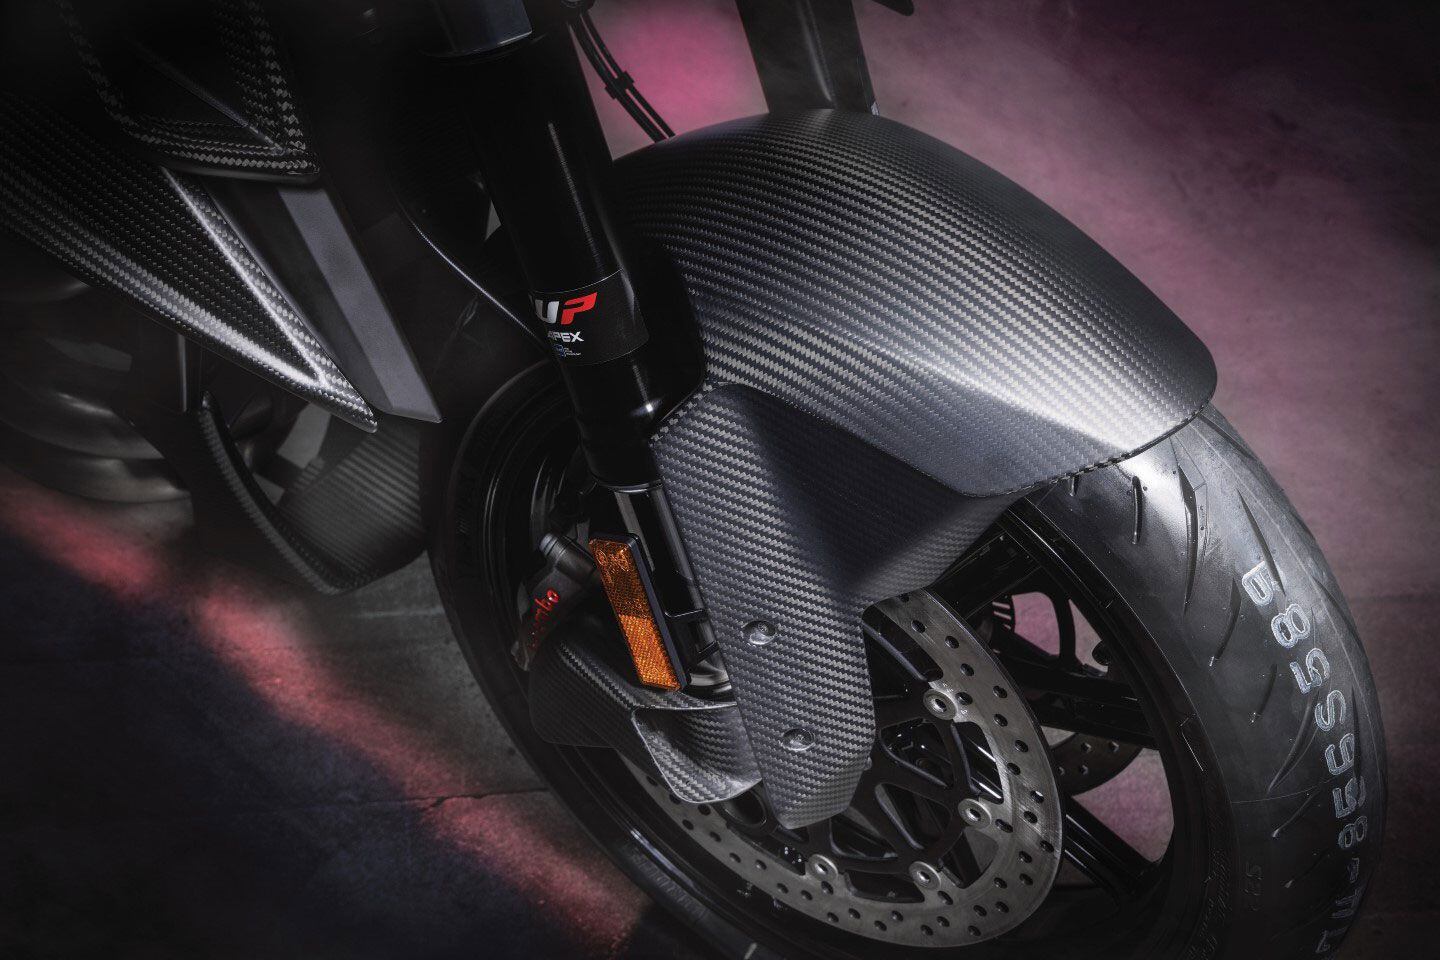 The 1300 R uses the same electronically adjustable WP Apex suspension as the KTM 1290 Super Duke R Evo.